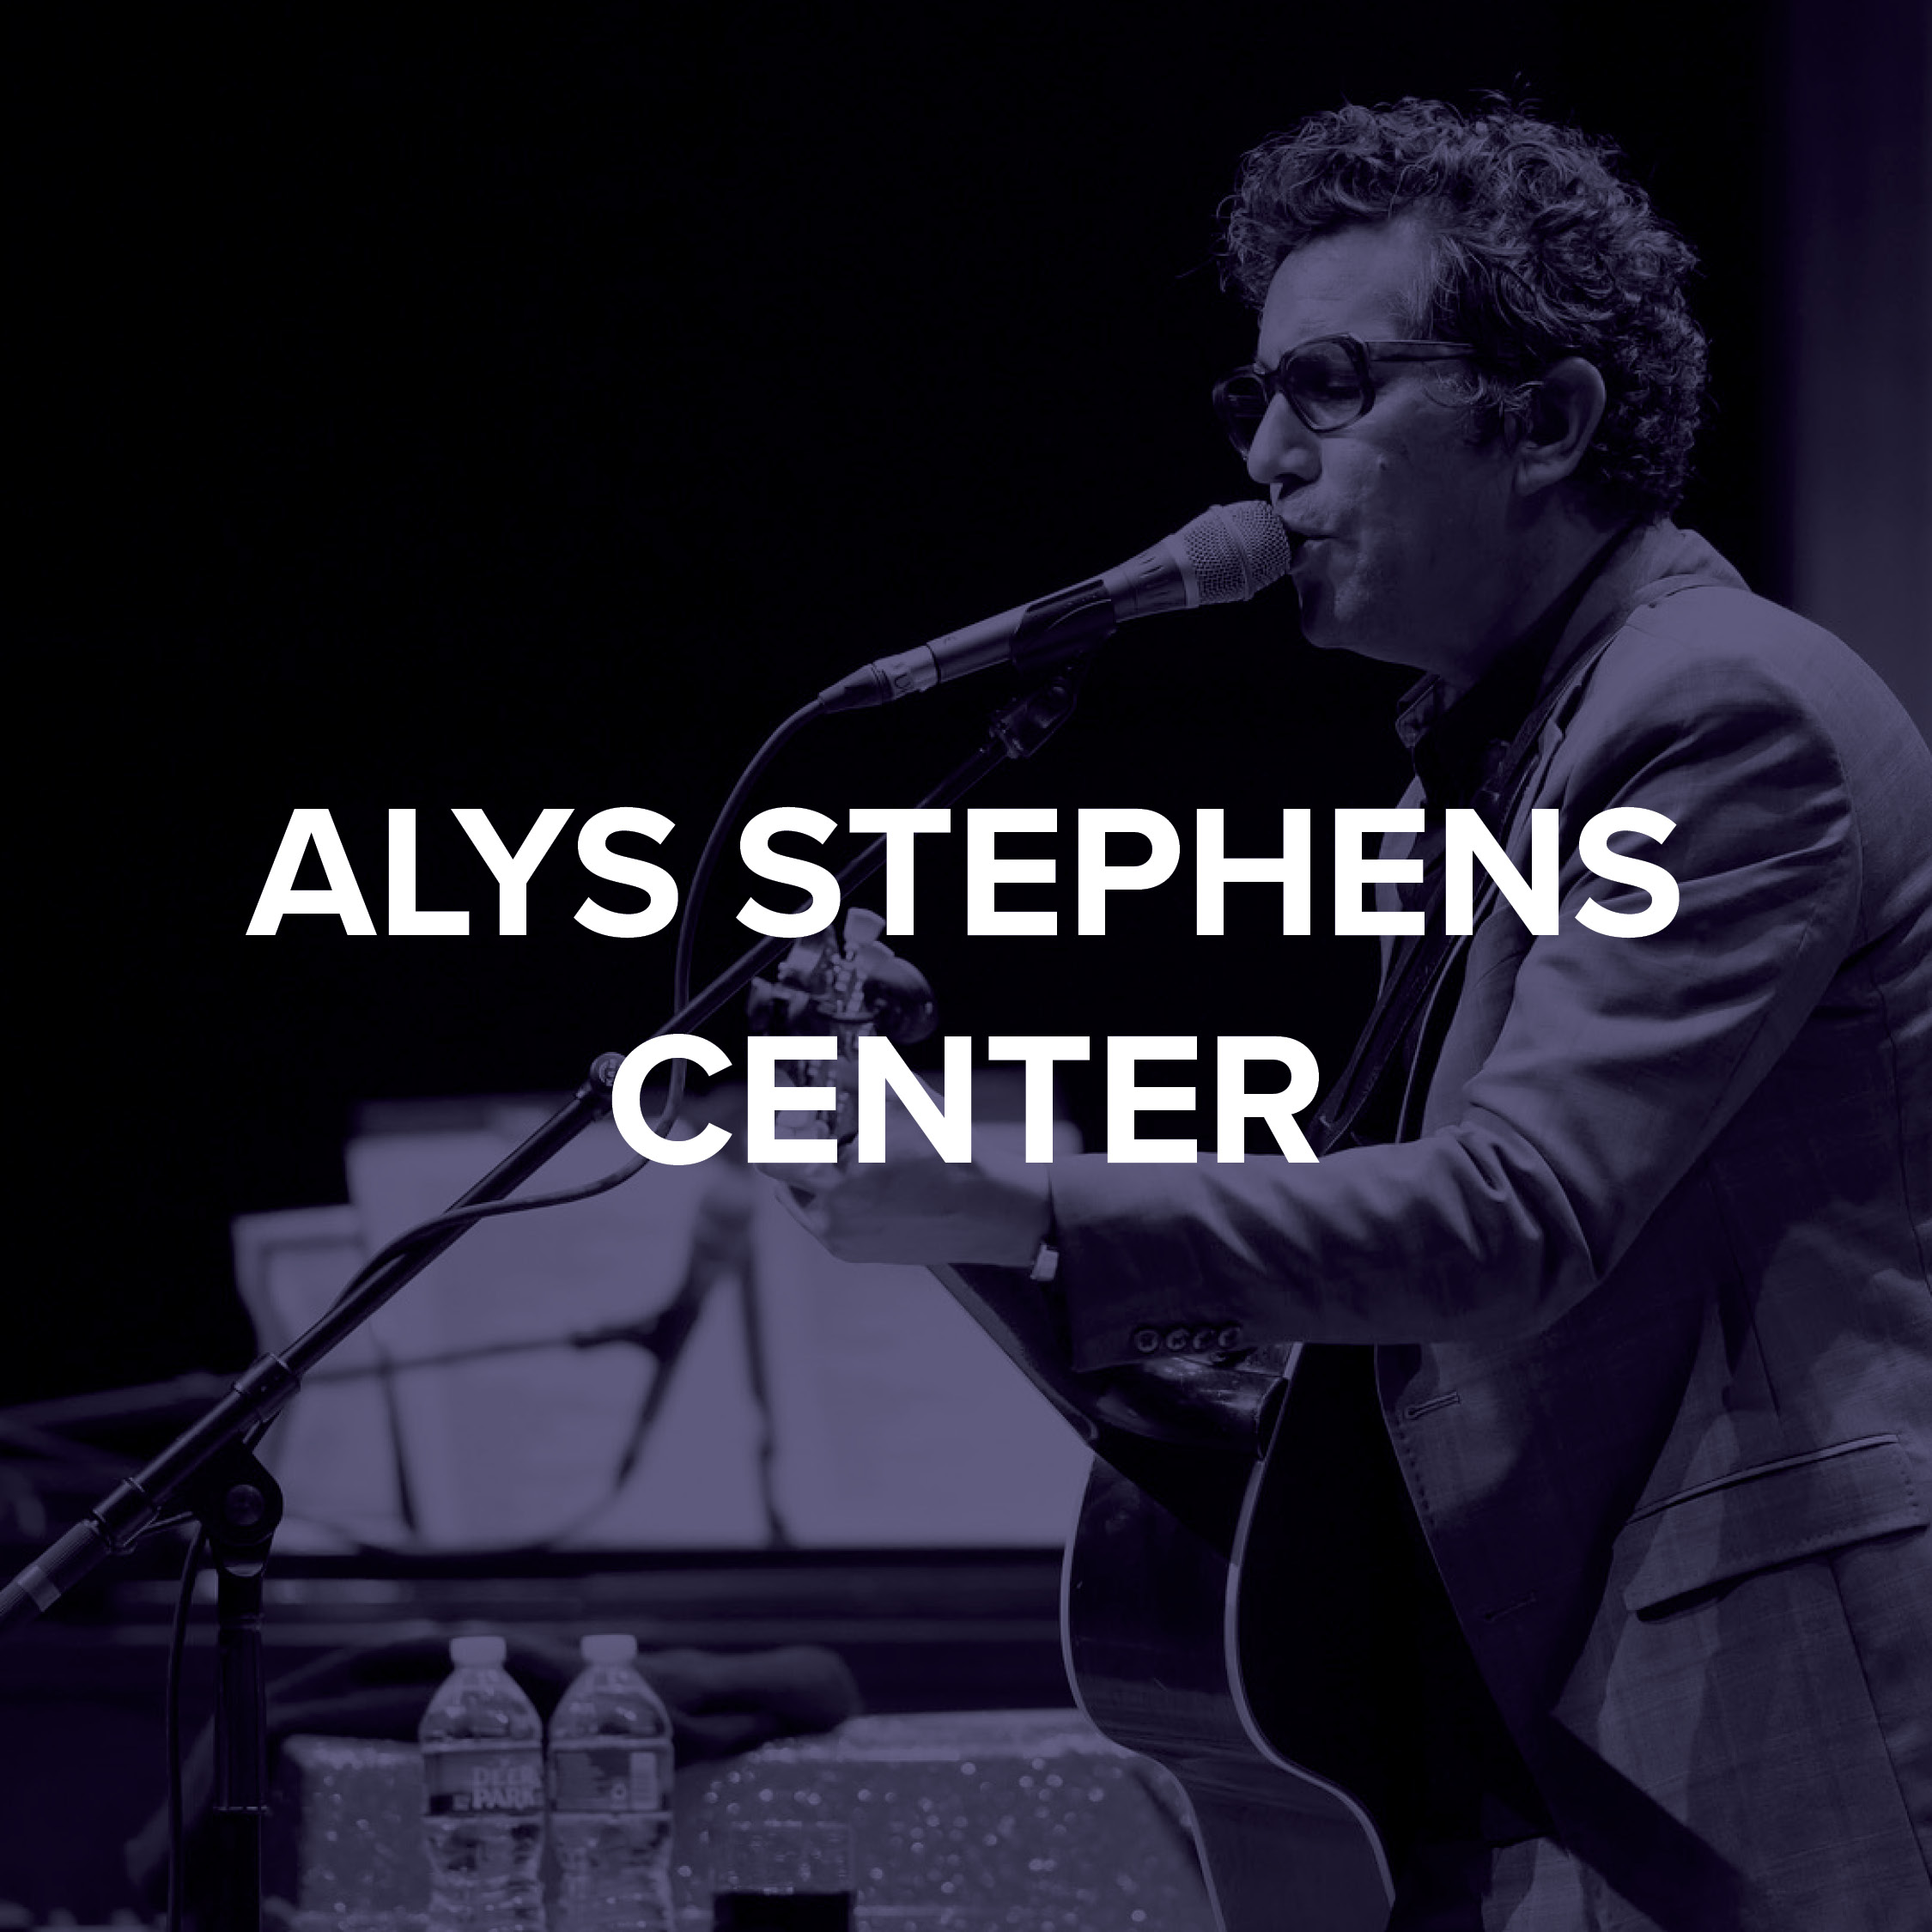 Learn more about the Alys Stephens Center